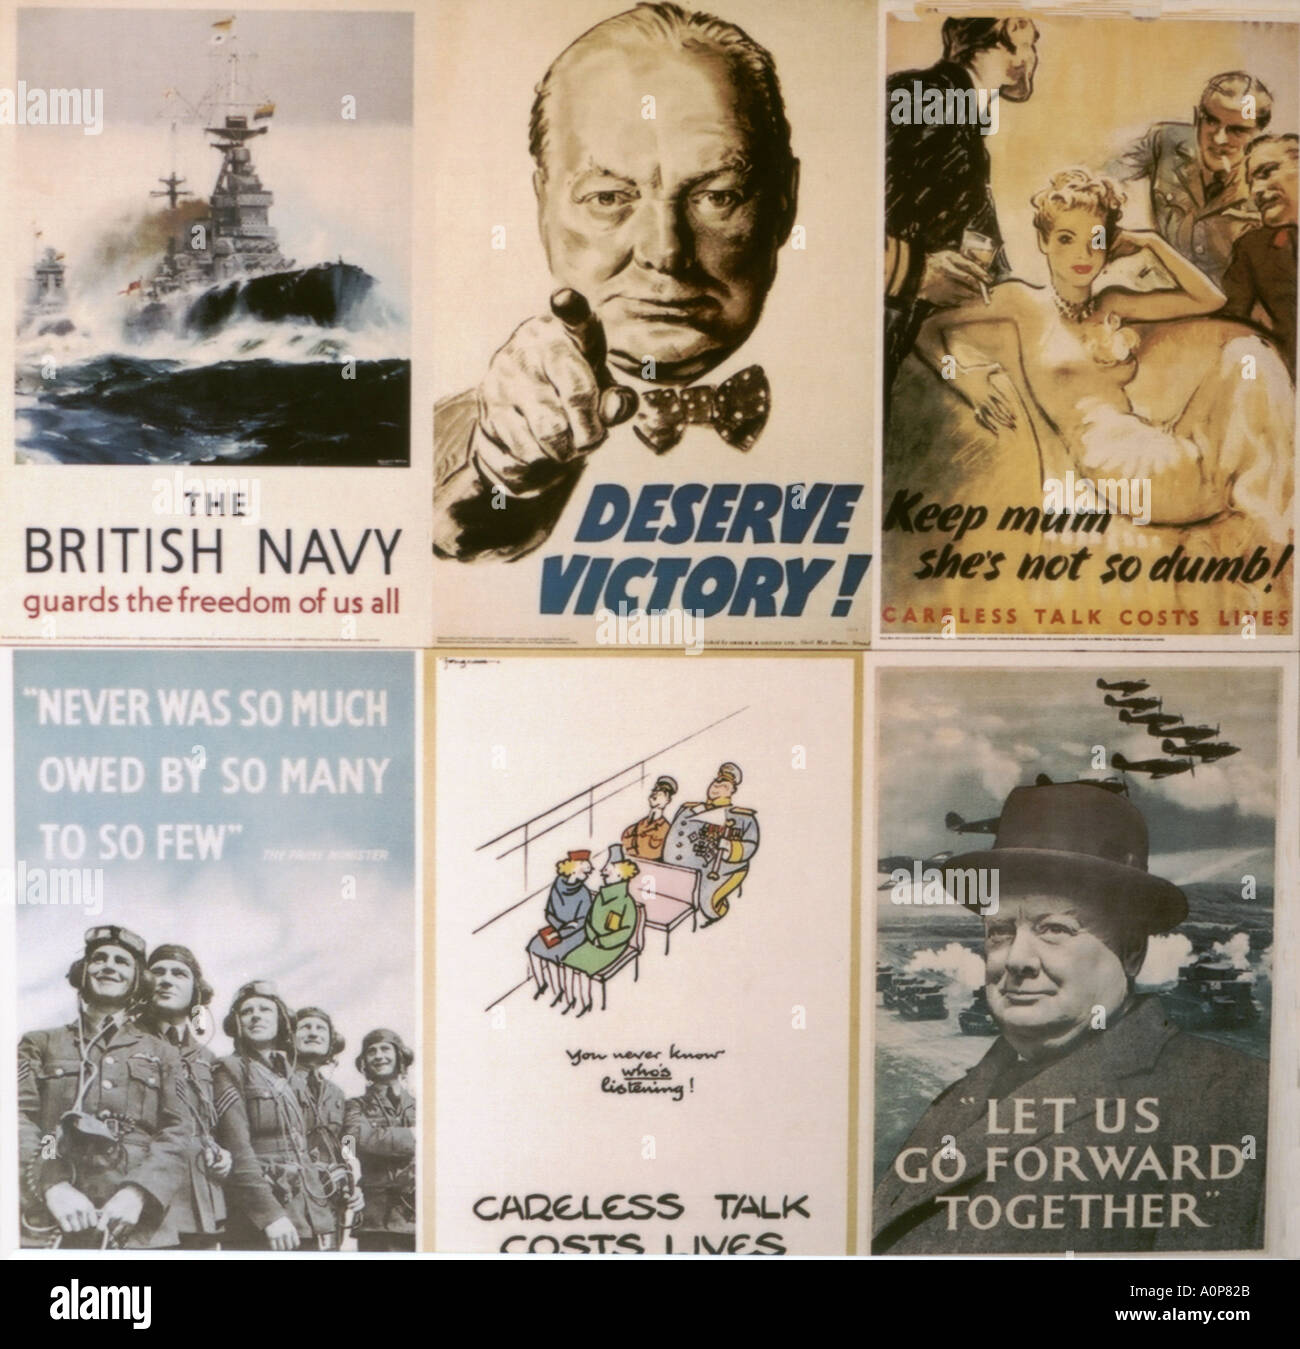 Vintage WWII British V Victory Dish Rationing War Poster Re-Print WW2 A4 3W4 